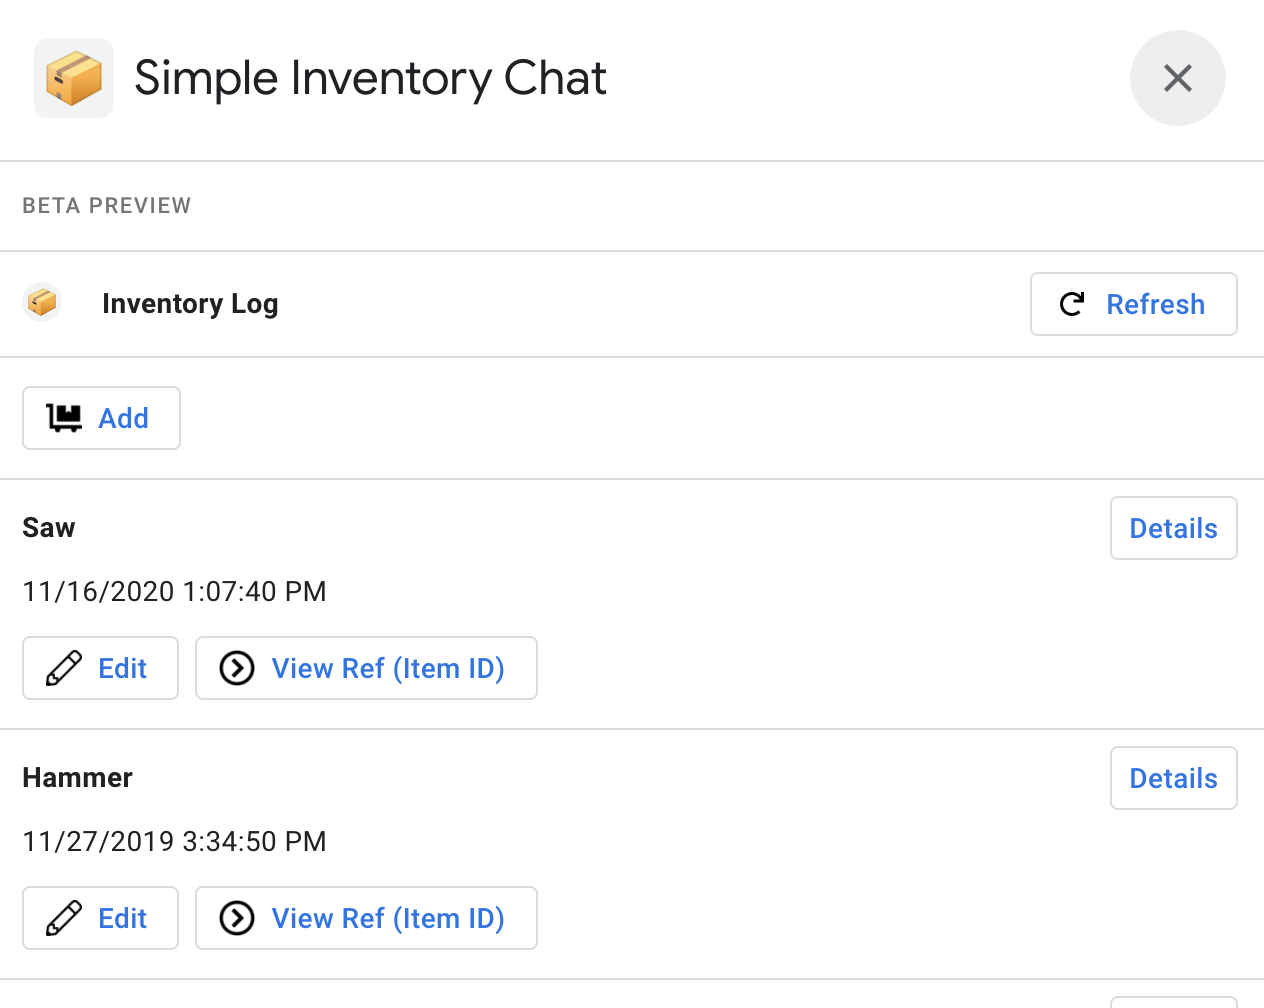 Application Simple Inventory Chat (Chat de l'inventaire simple)